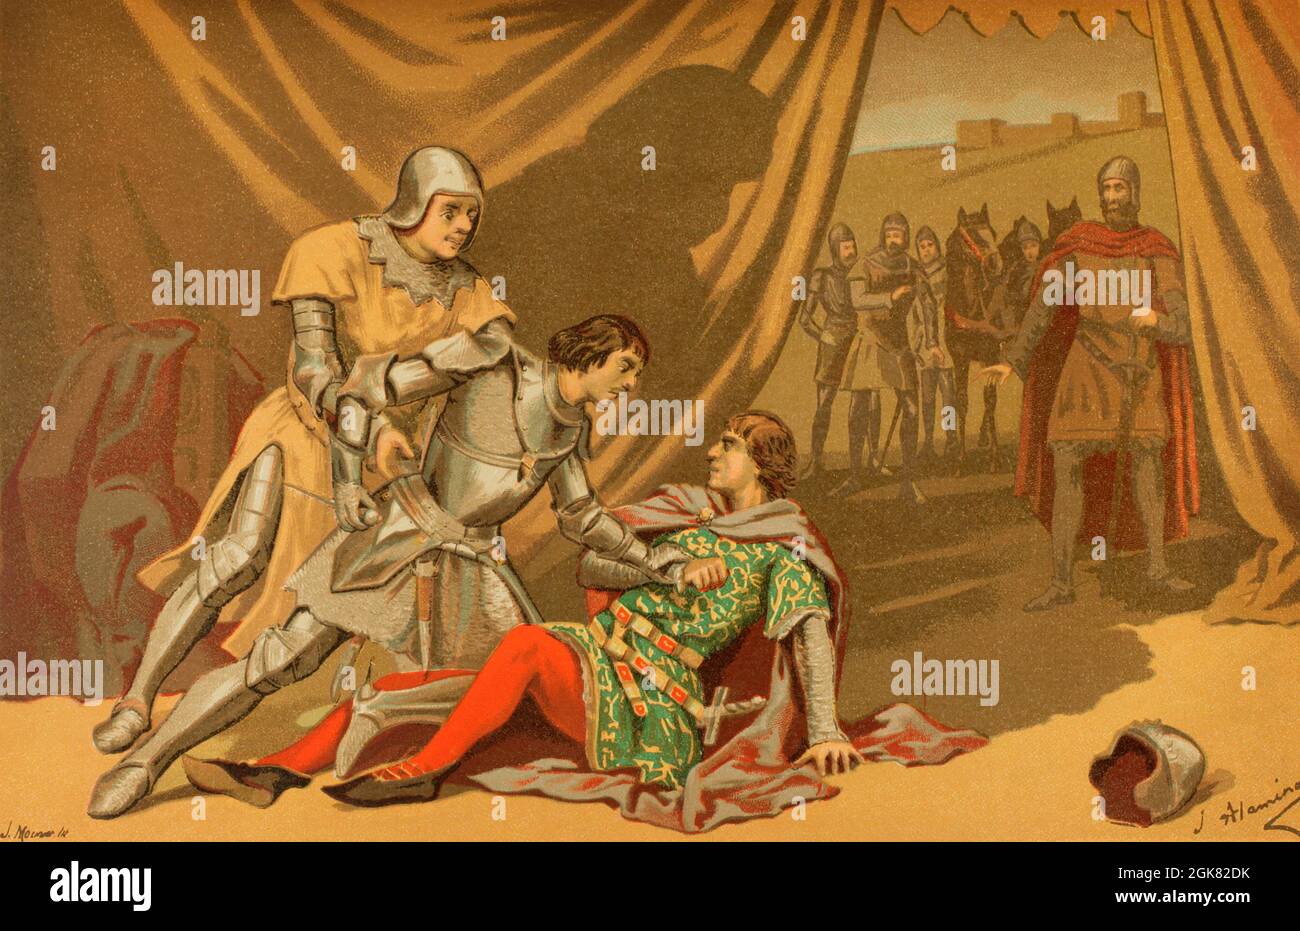 Peter I of Castile (1334-1369) called the Cruel or the Just. King of Castile from 1350 to 1369. Death of Peter the Cruel. Moment when Beltrán Duguesclín holds the king to allow his stepbrother, Enrique de Trastámara, to stab him. Illustration by J. Alaminos. Chromolithography. Historia General de España (General History of Spain), by Miguel Morayta. Volume II. Madrid, 1889. Stock Photo